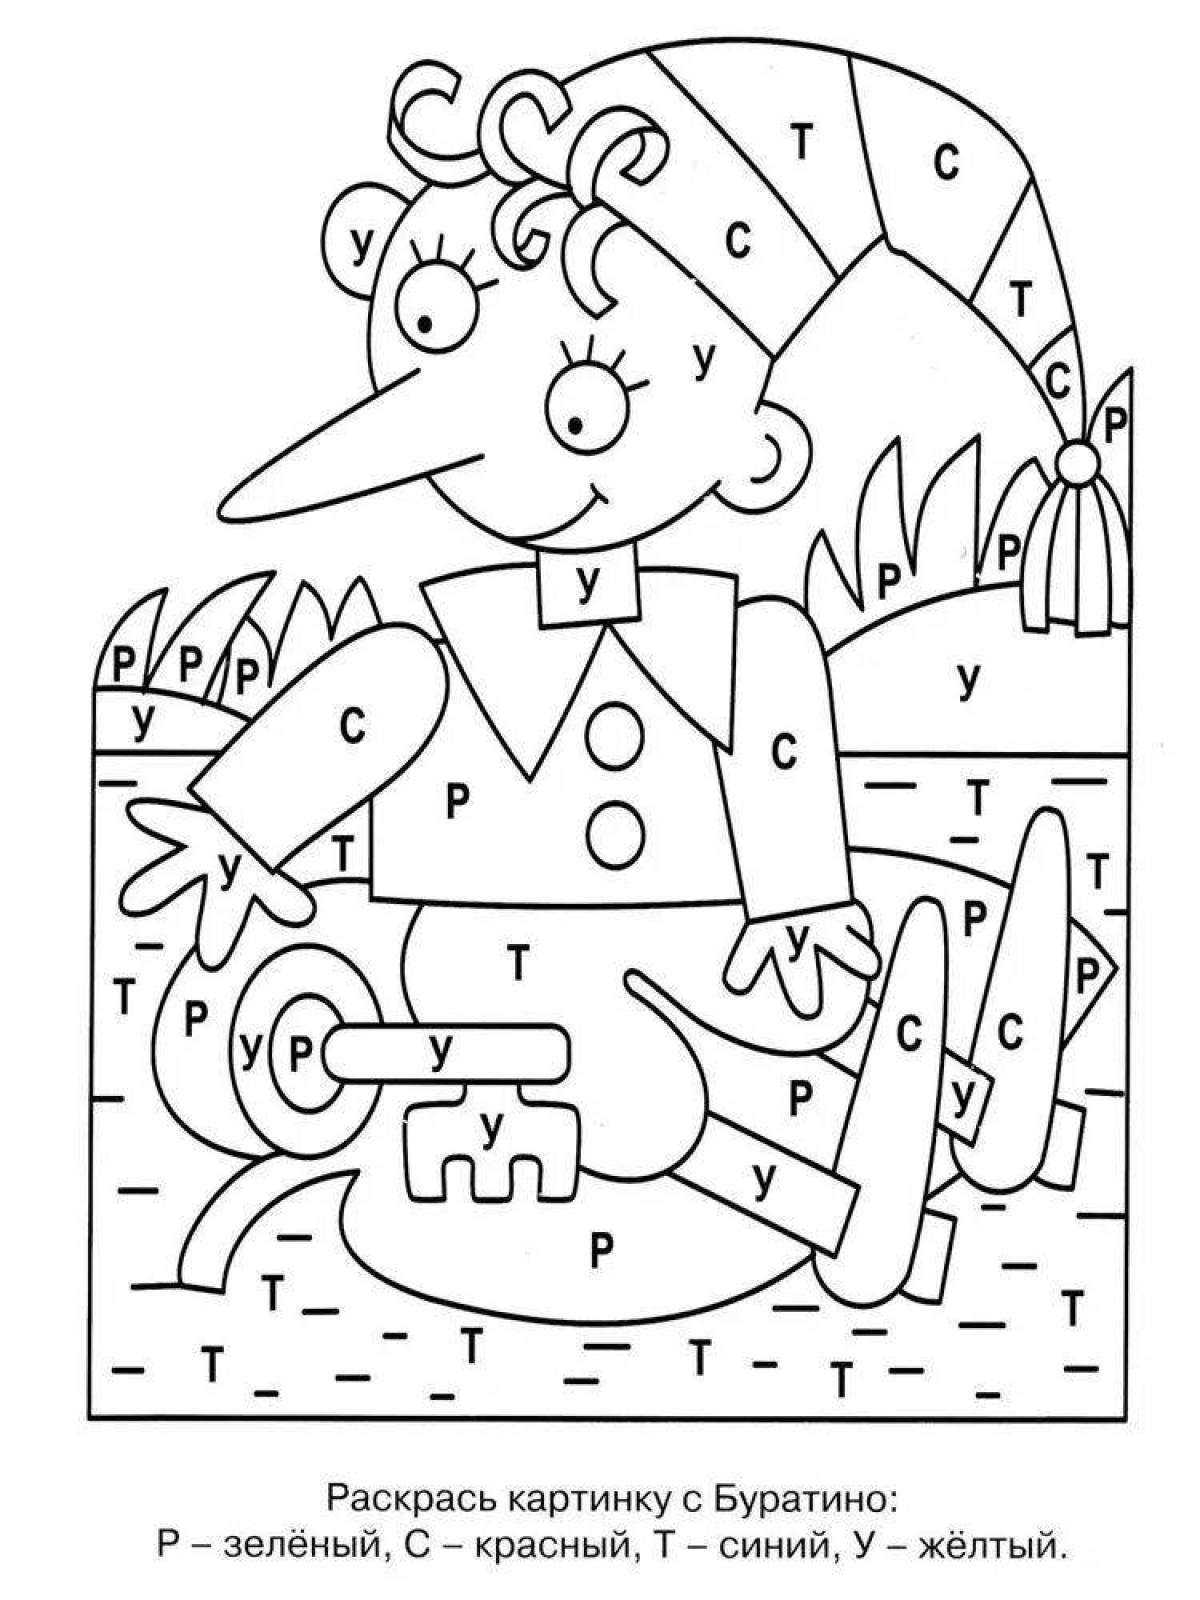 An entertaining math coloring book for kids 6-7 years old